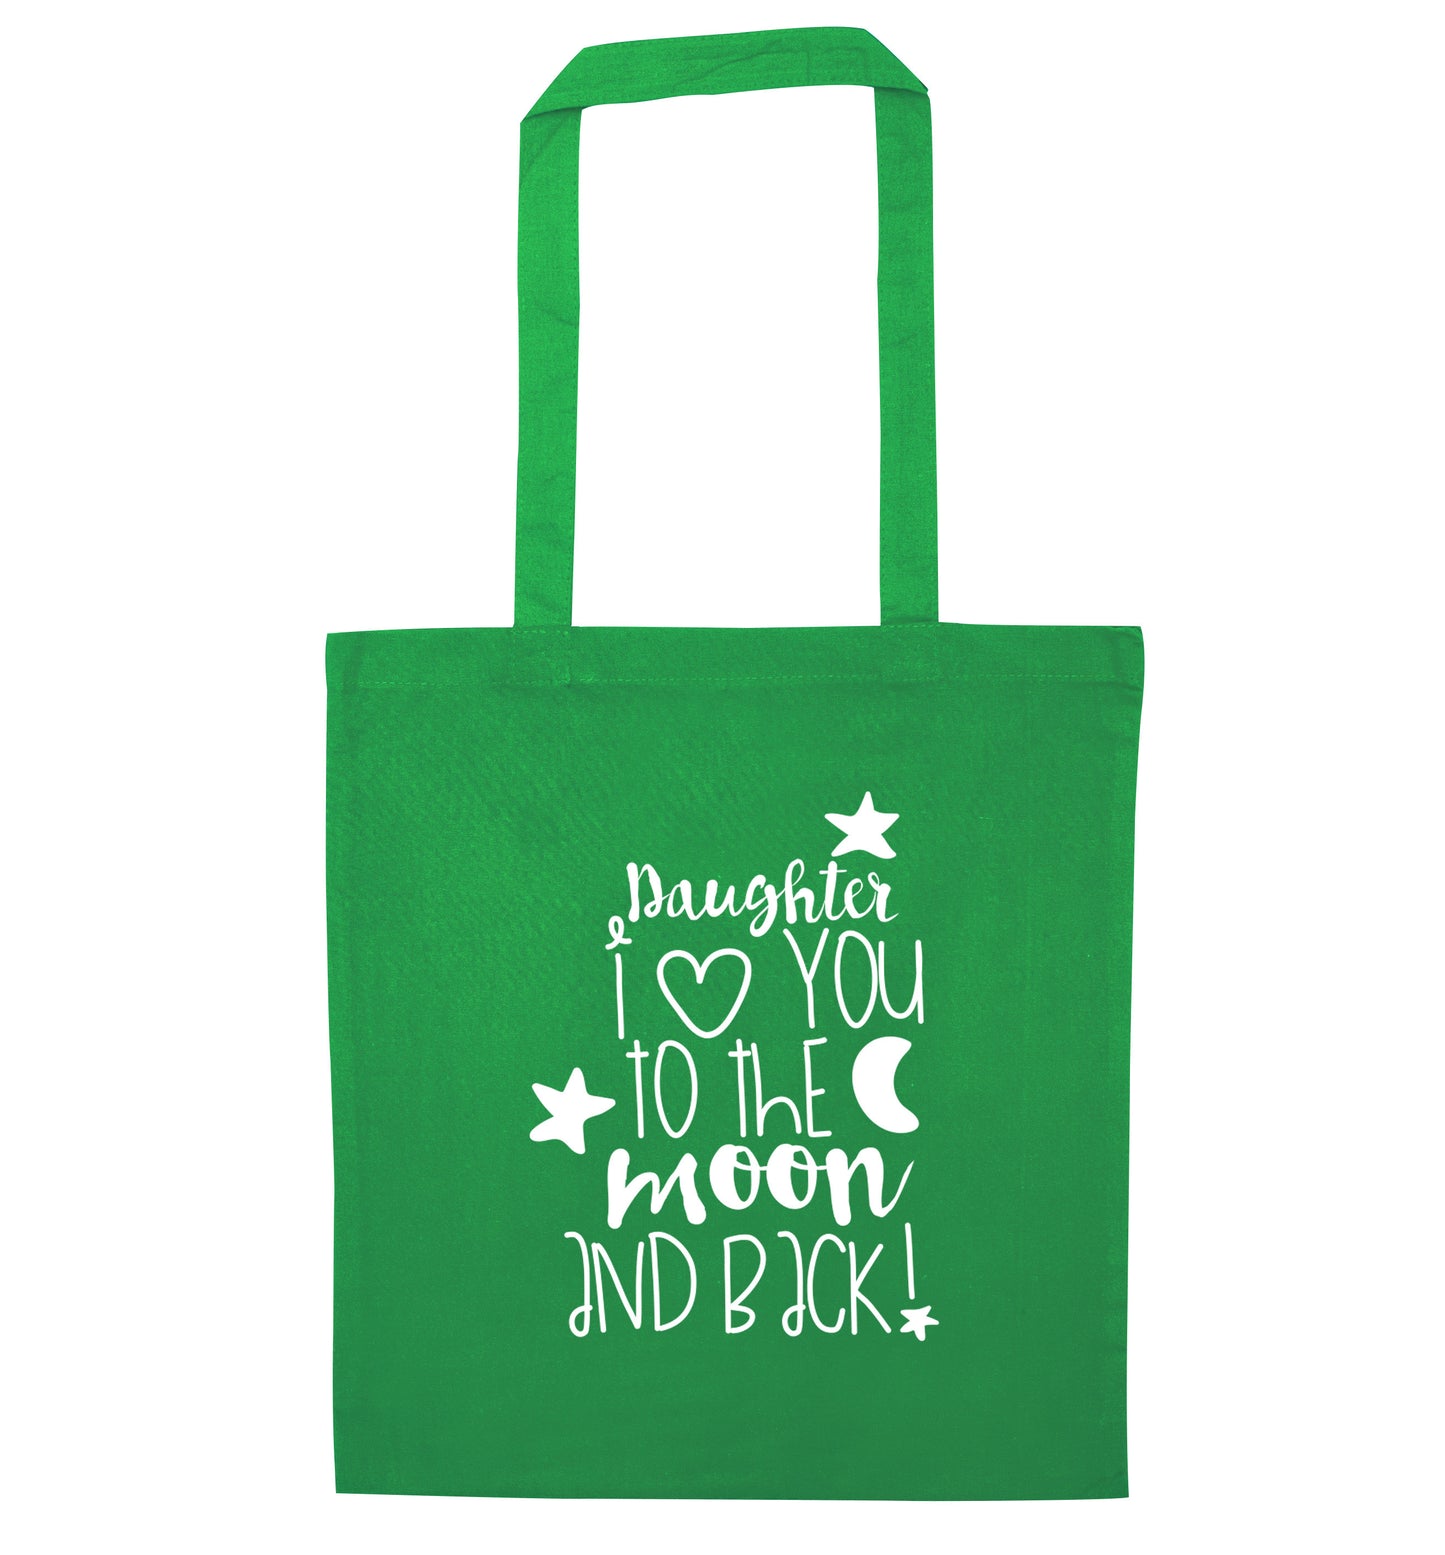 Daughter I love you to the moon and back green tote bag